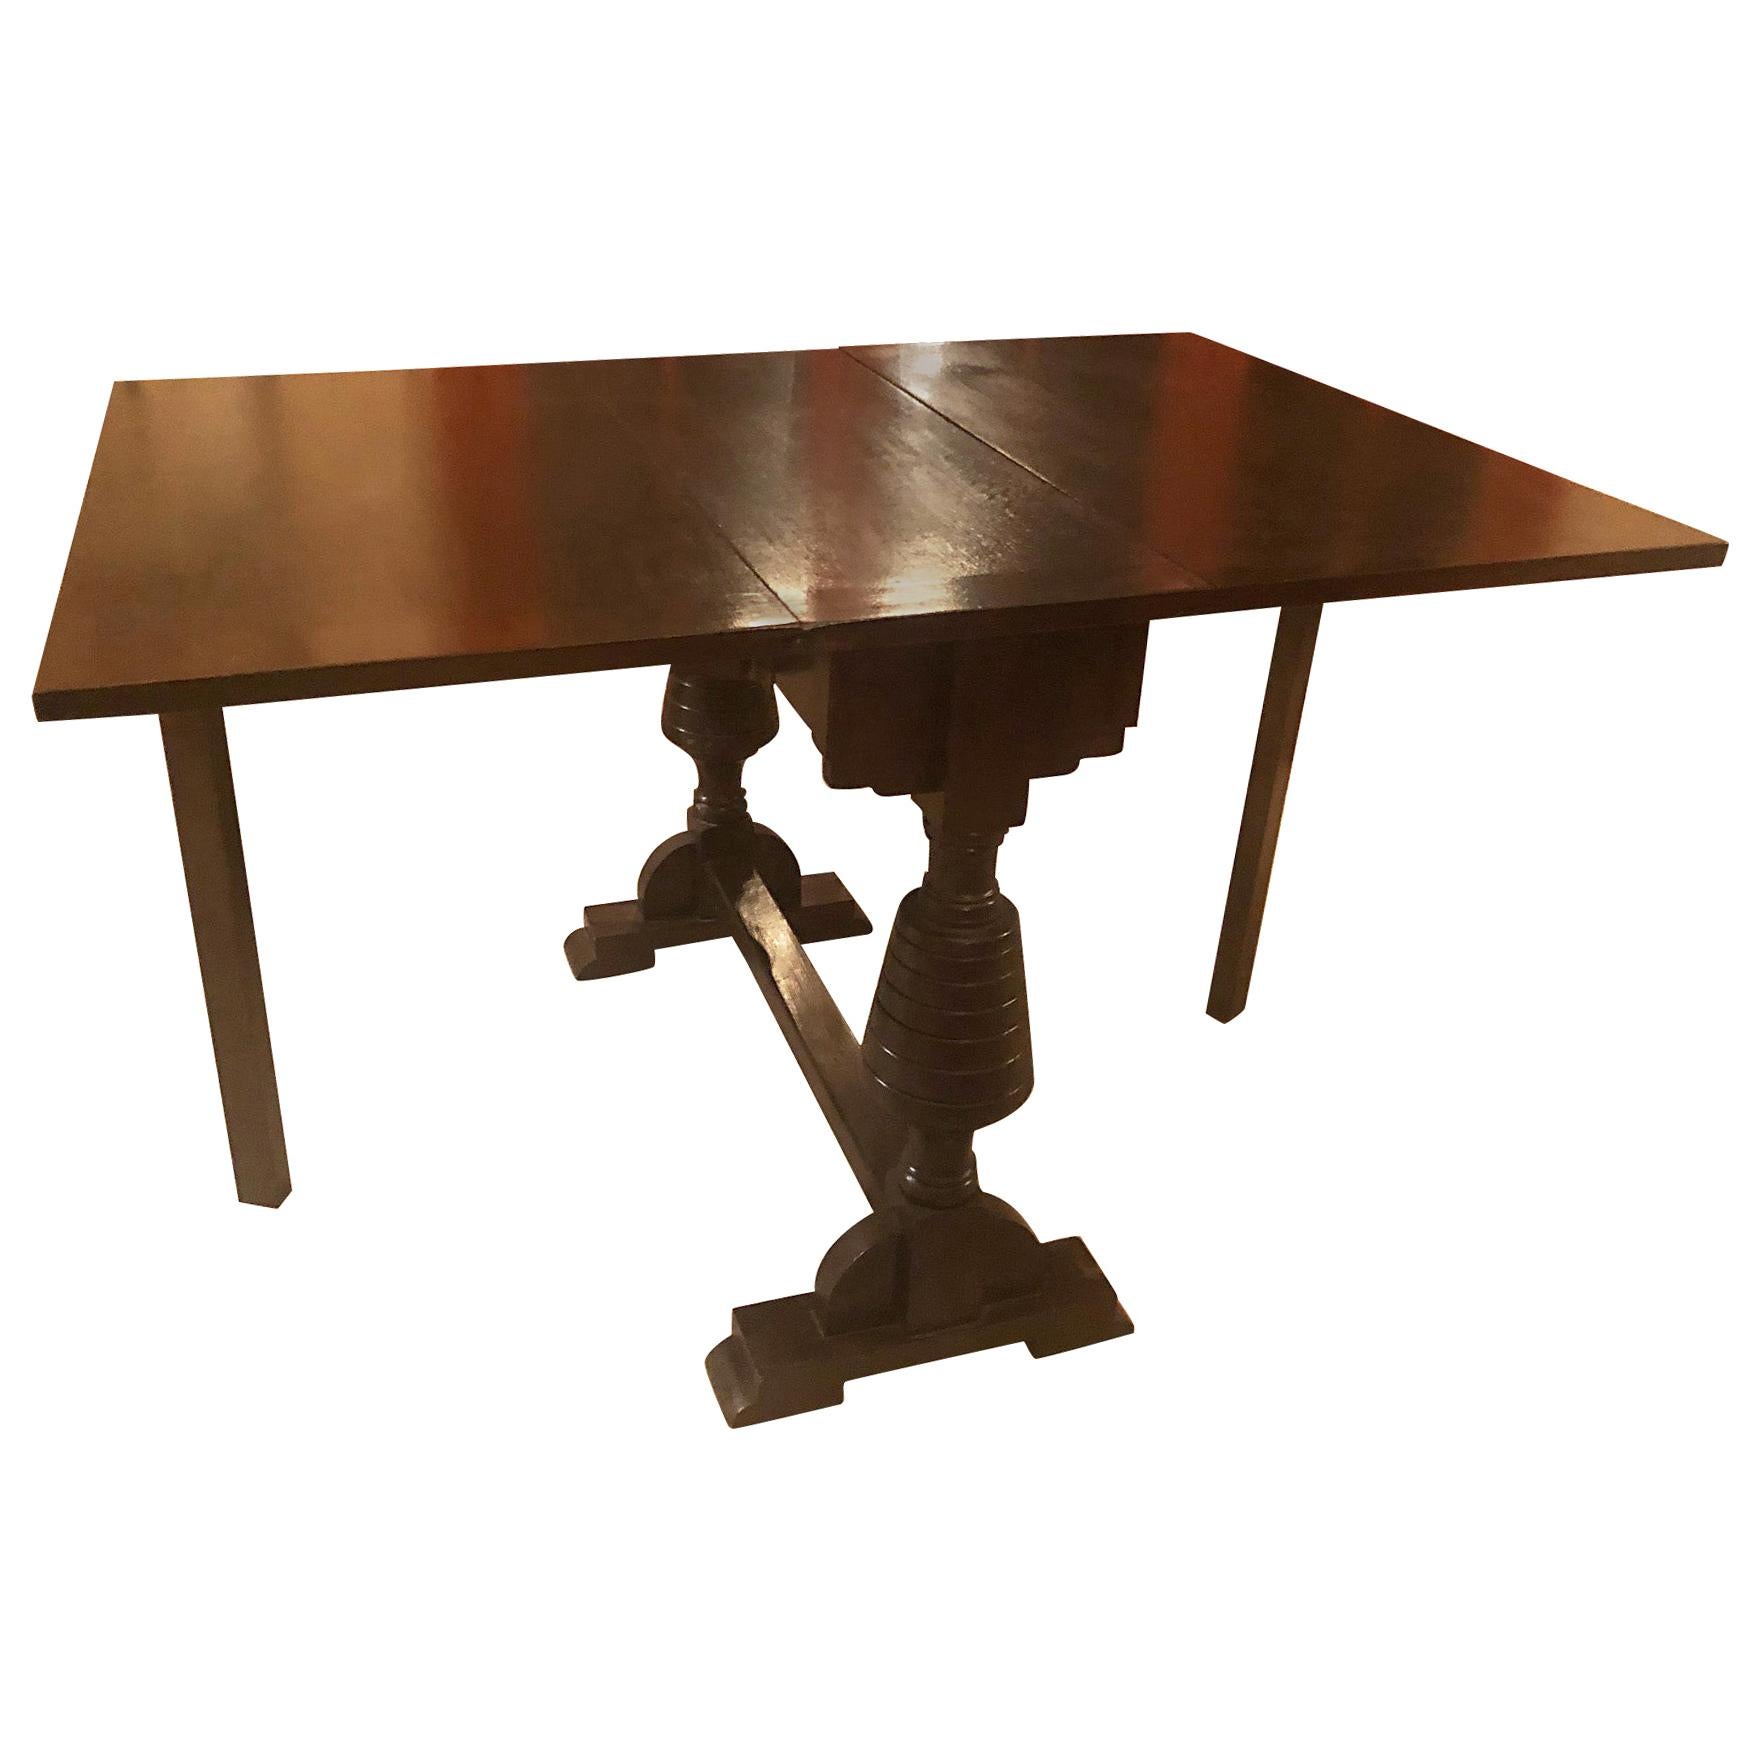  Original  solid Oak Strip Table, Beautiful as a Console Table, Dark Color For Sale